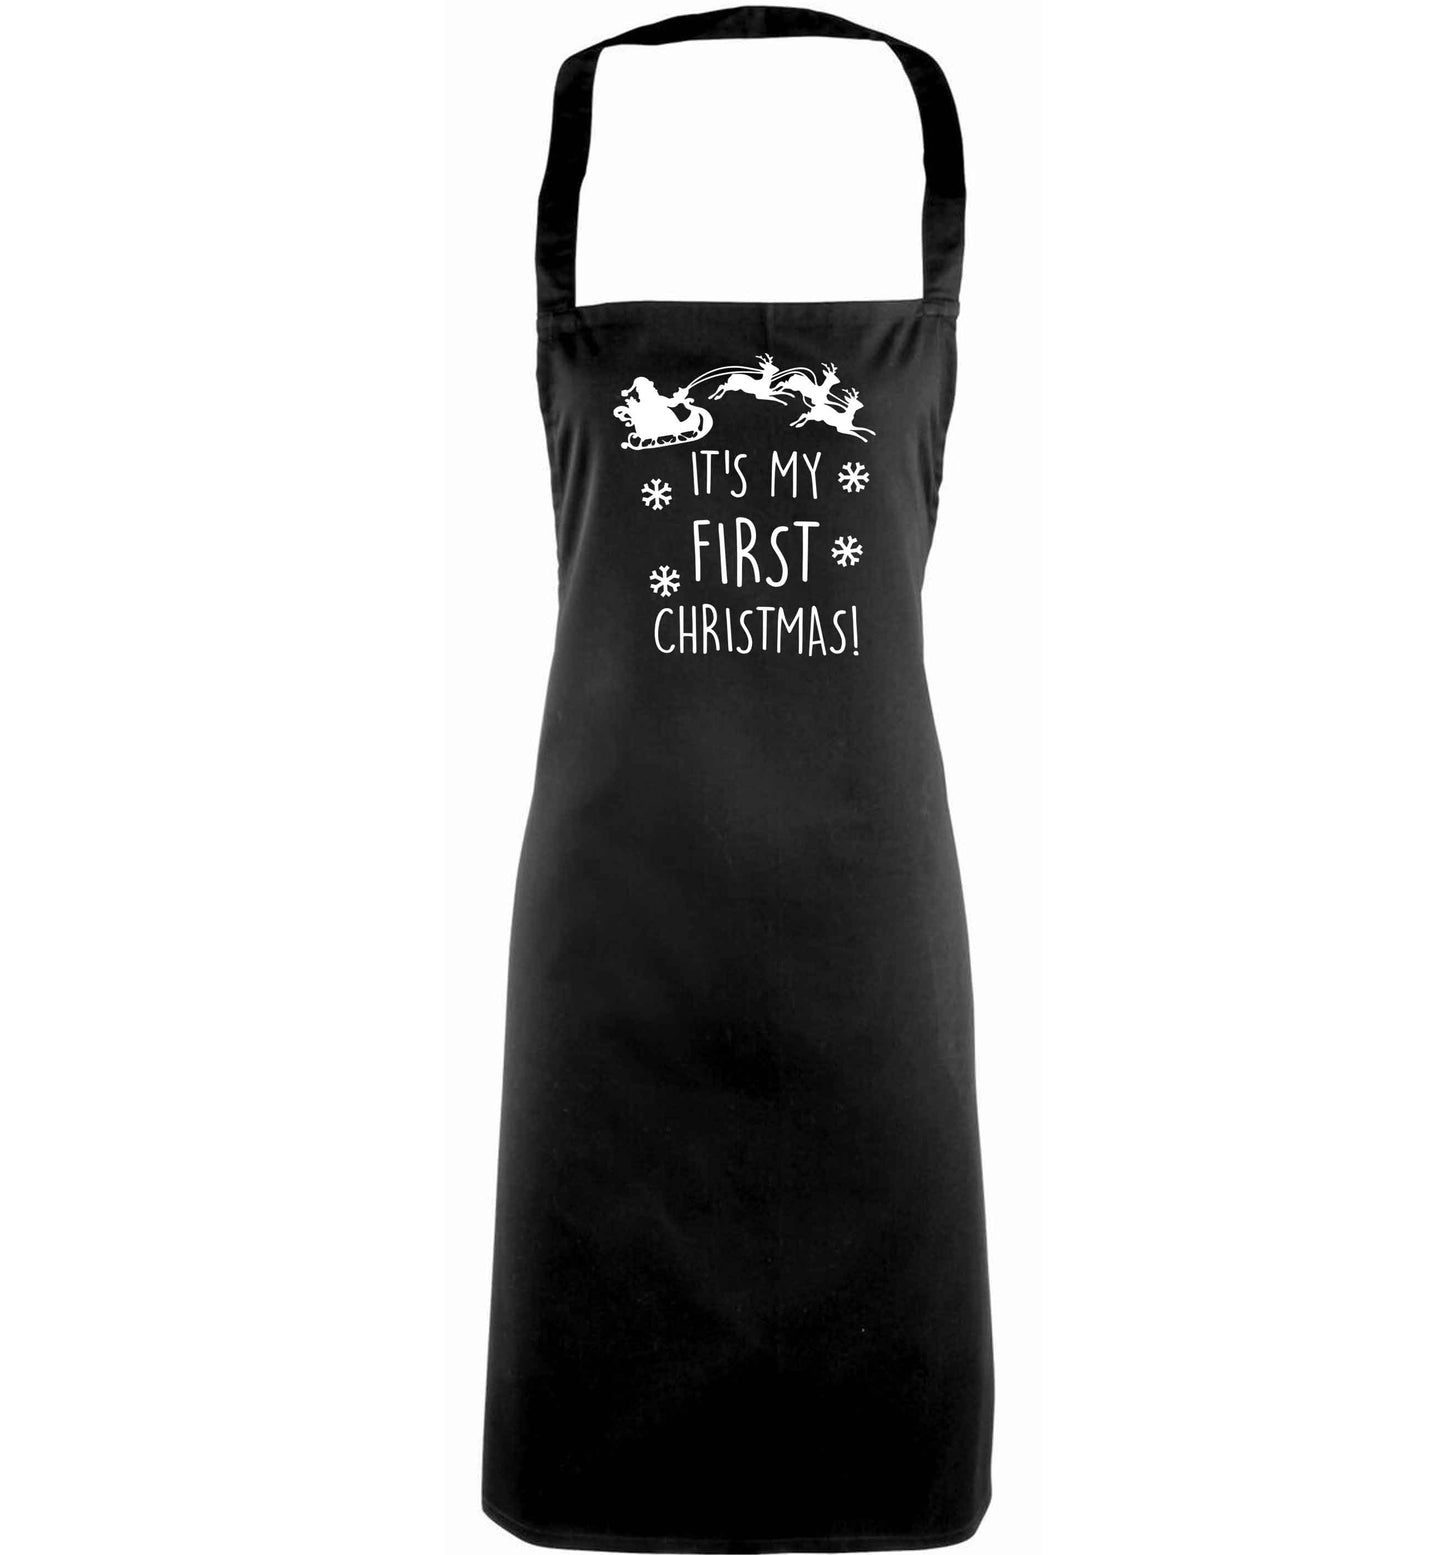 It's my first Christmas - Santa sleigh text adults black apron